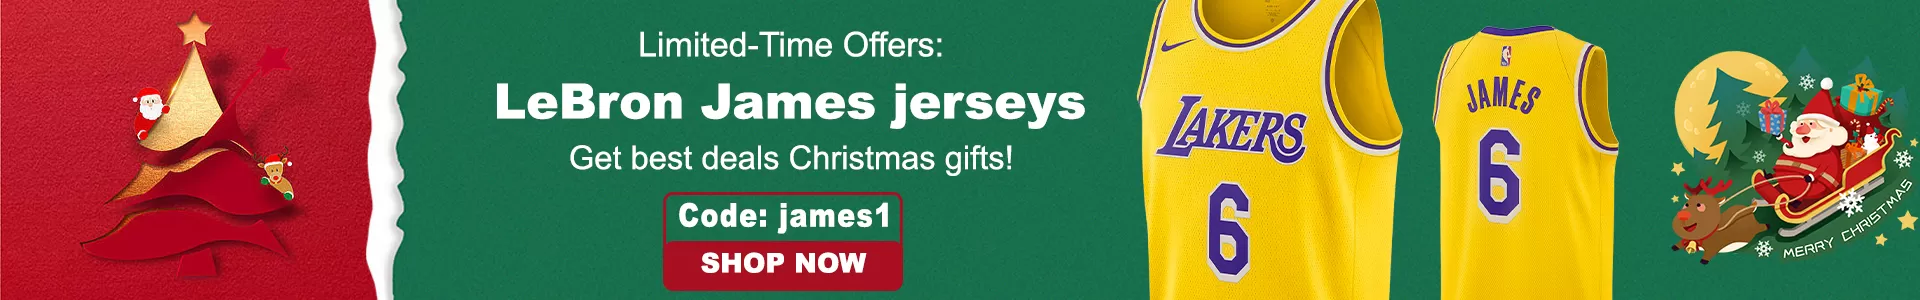 LeBron James Exclusive Offer - buybasketballnow